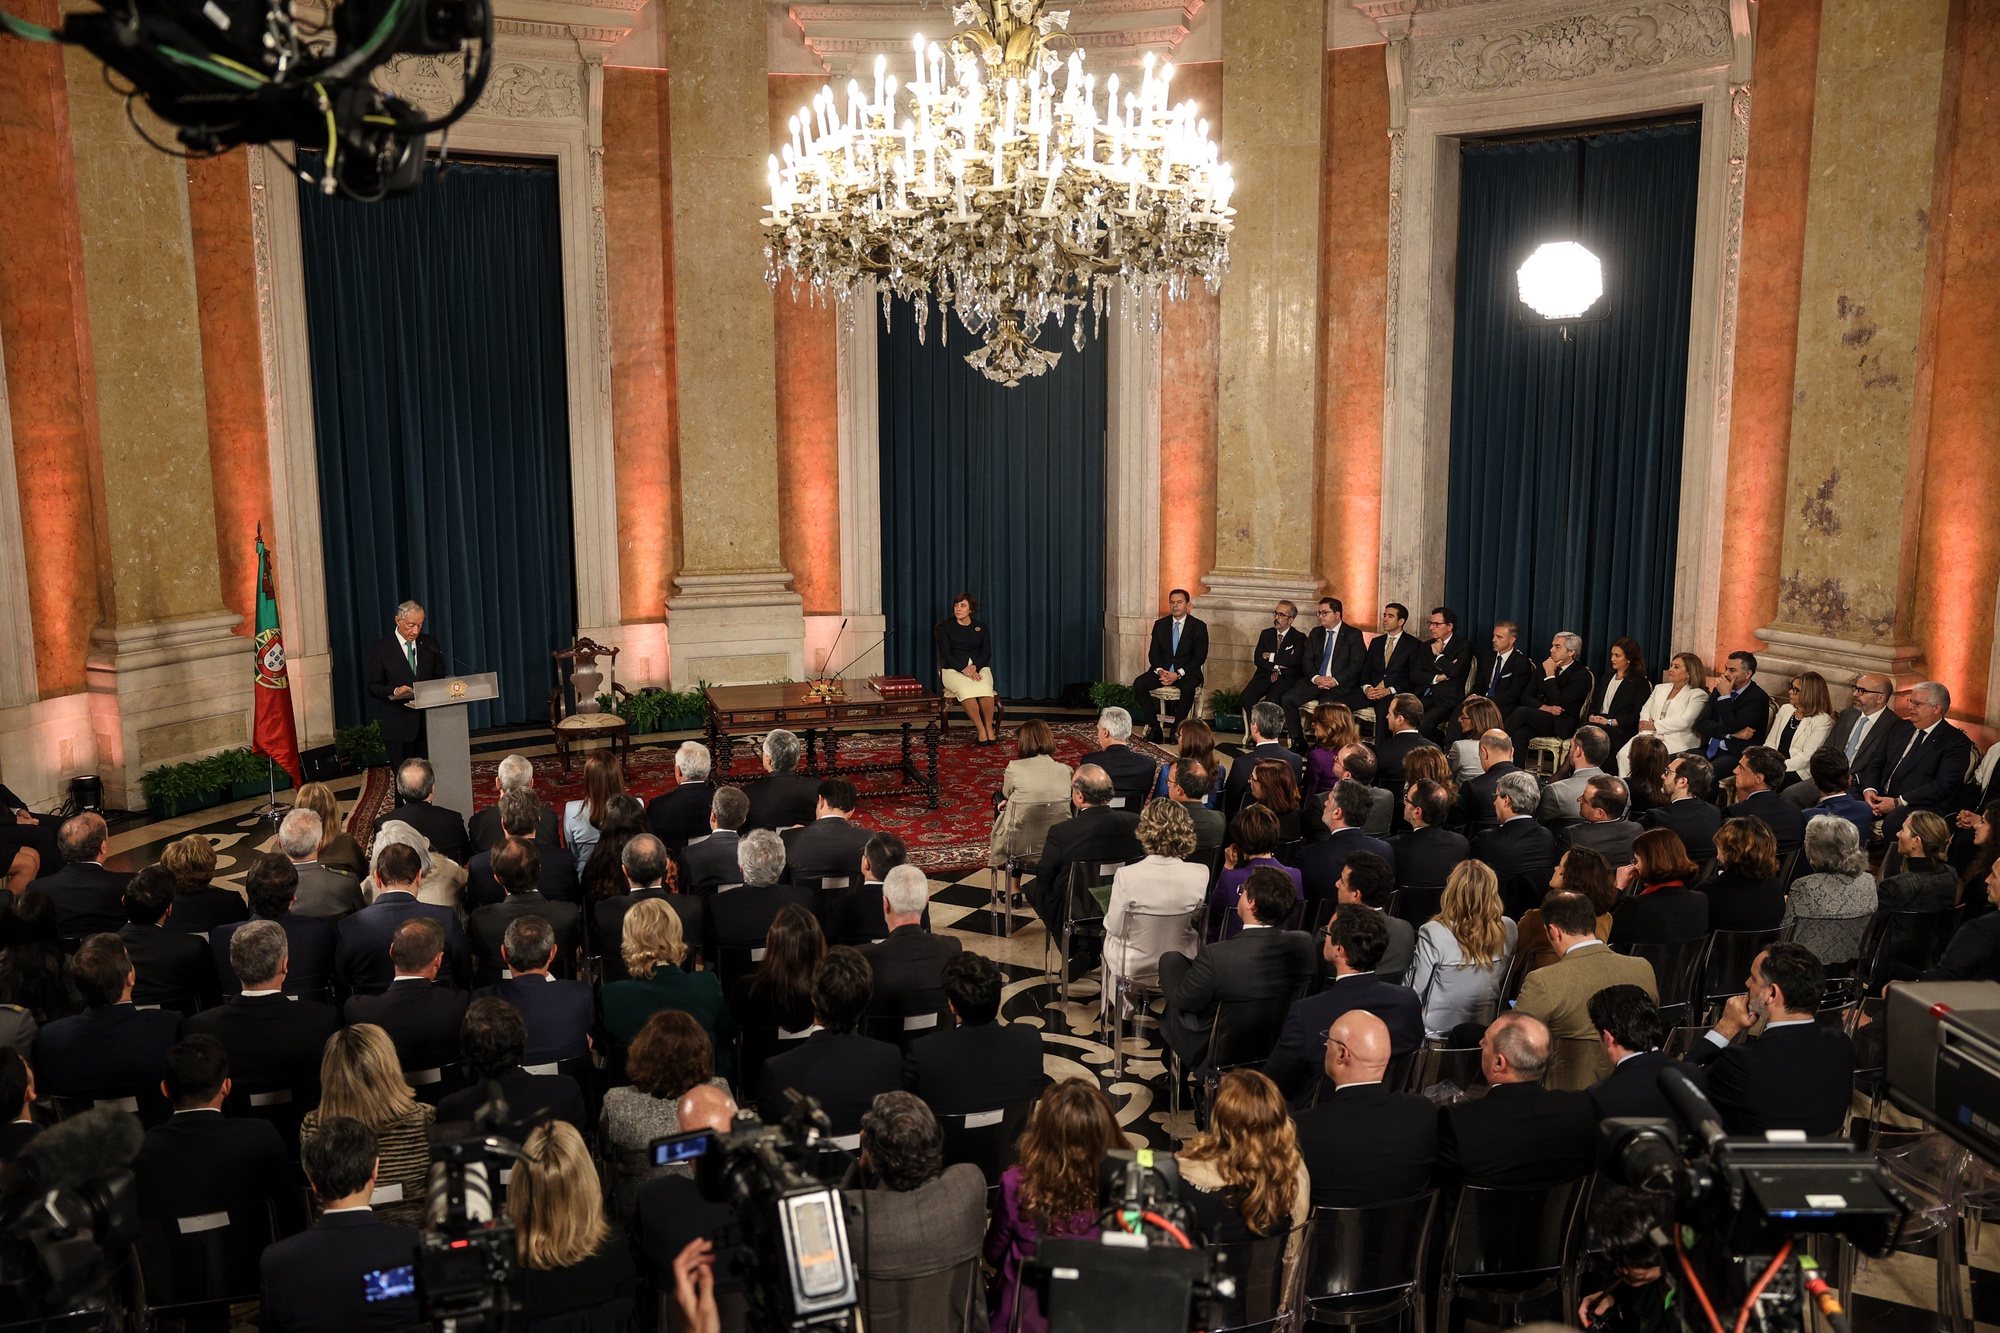 Portuguese President Marcelo Rebelo de Sousa (L), speaks during the swearing in cerimony of the XXIV Constitutional Government held at Ajuda Palace, in Lisbon, Portugal, 02 April March 2024. These legislative elections resulted in the victory of AD - a pre-election coalition formed by PSD, CDS-PP and People&#039;s Monarchist Party (PPM) - by around 54,000 votes (0.85%) more than the PS, the narrowest margin in the history of Portuguese democracy. The two coalitions led by the PSD (the AD on the mainland and in the Azores, and Madeira Primeiro with the PSD and CDS-PP in Madeira) - won 28.83% of the votes and 80 members of parliament (78 for the PSD and two from the CDS-PP), according to the official results. The PS was the second-most-voted party with 27.98% and 78 MPs. MIGUEL A. LOPES/LUSA